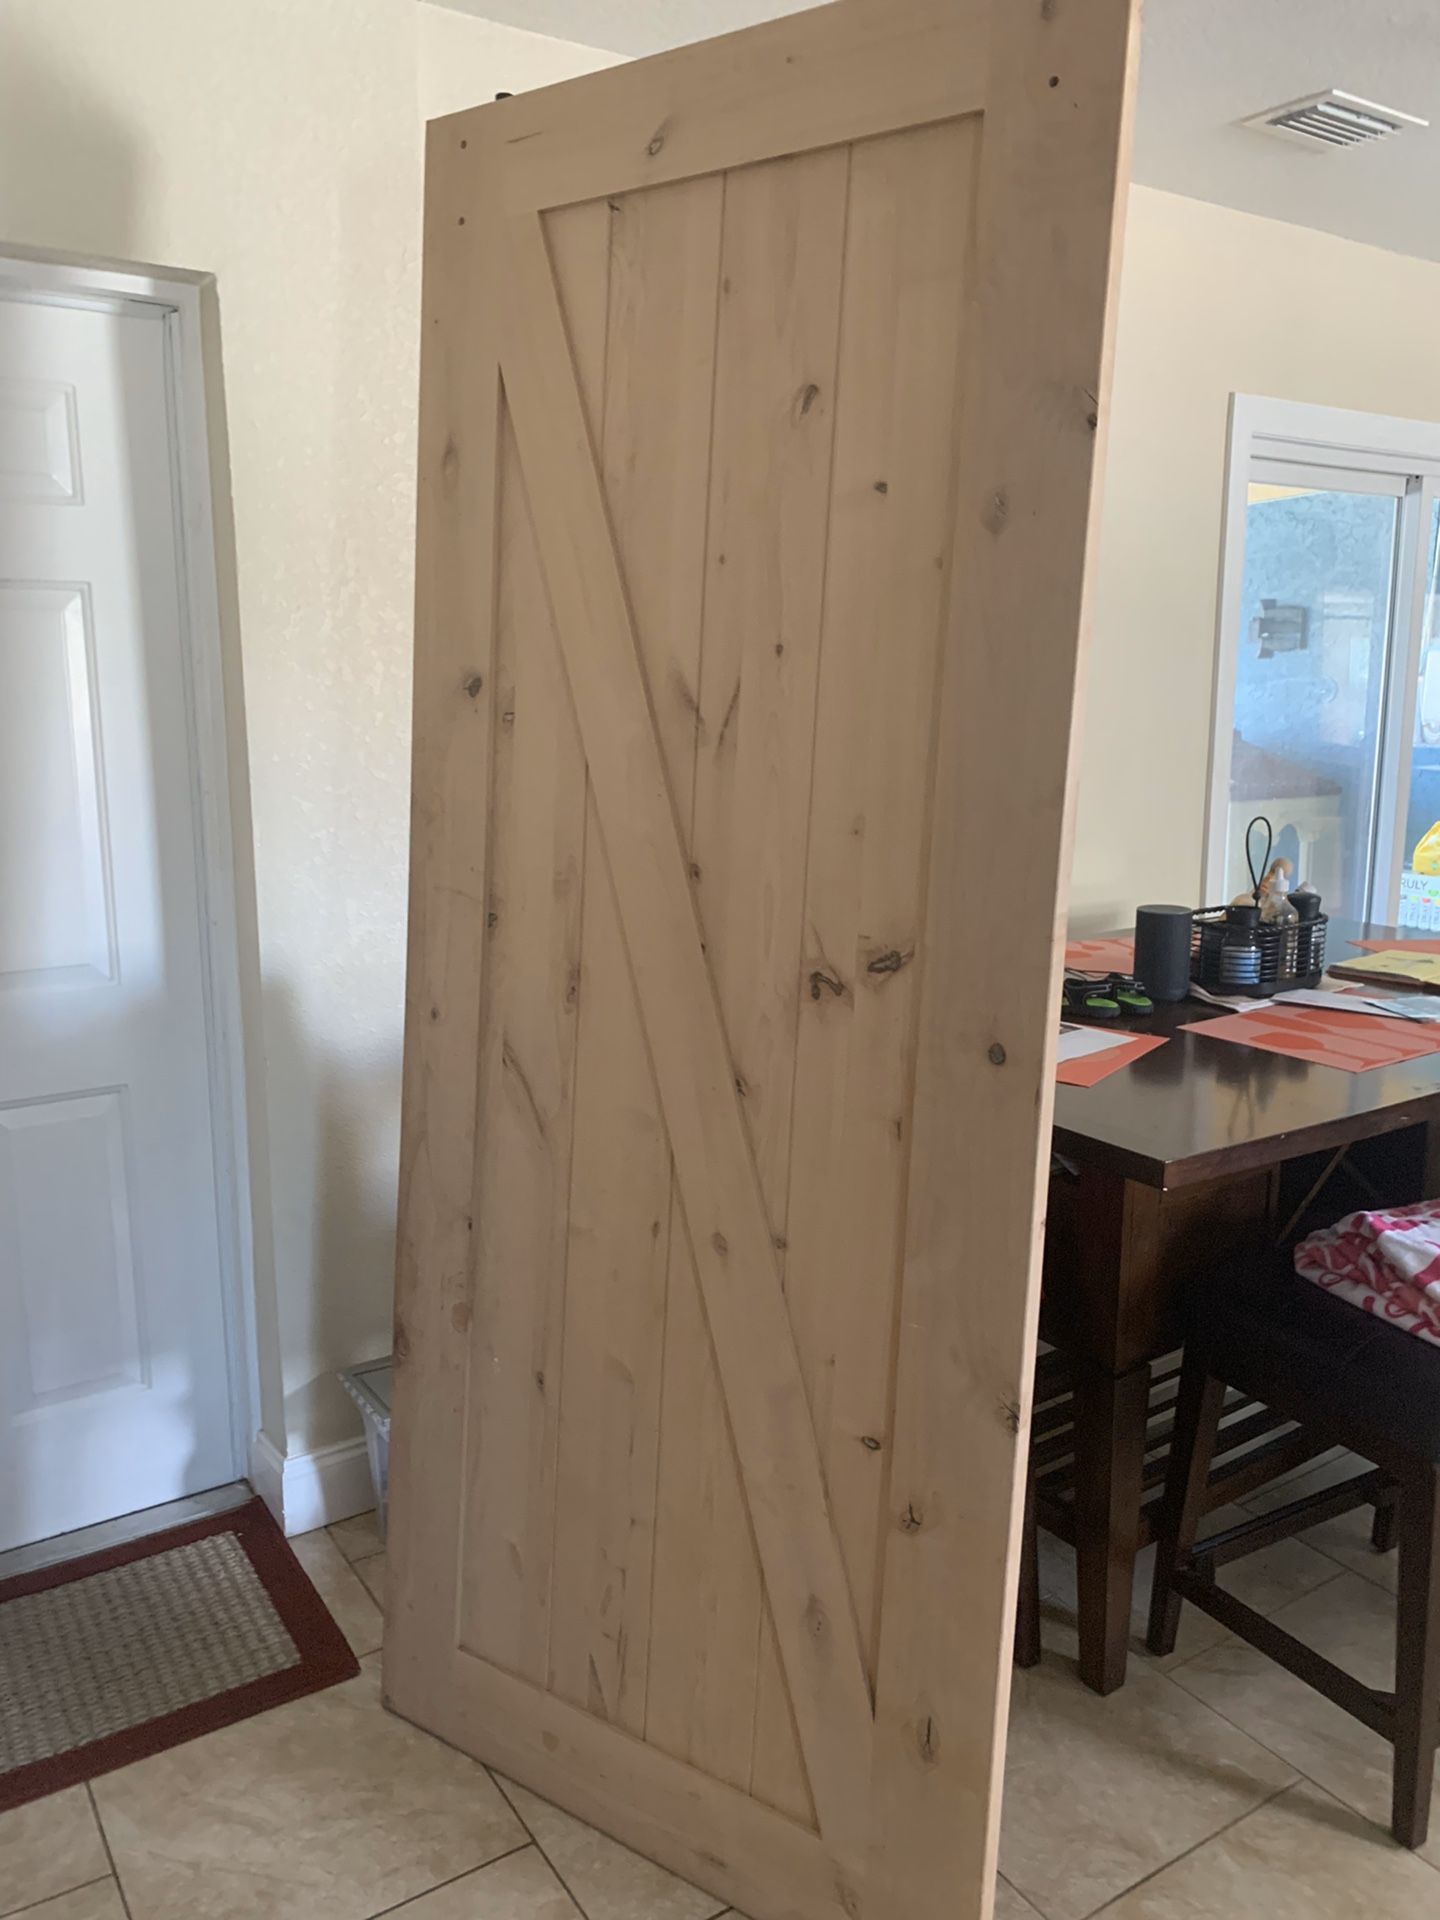 Solid wood barn door with installation kit included . 3feet wide by 6 feet long